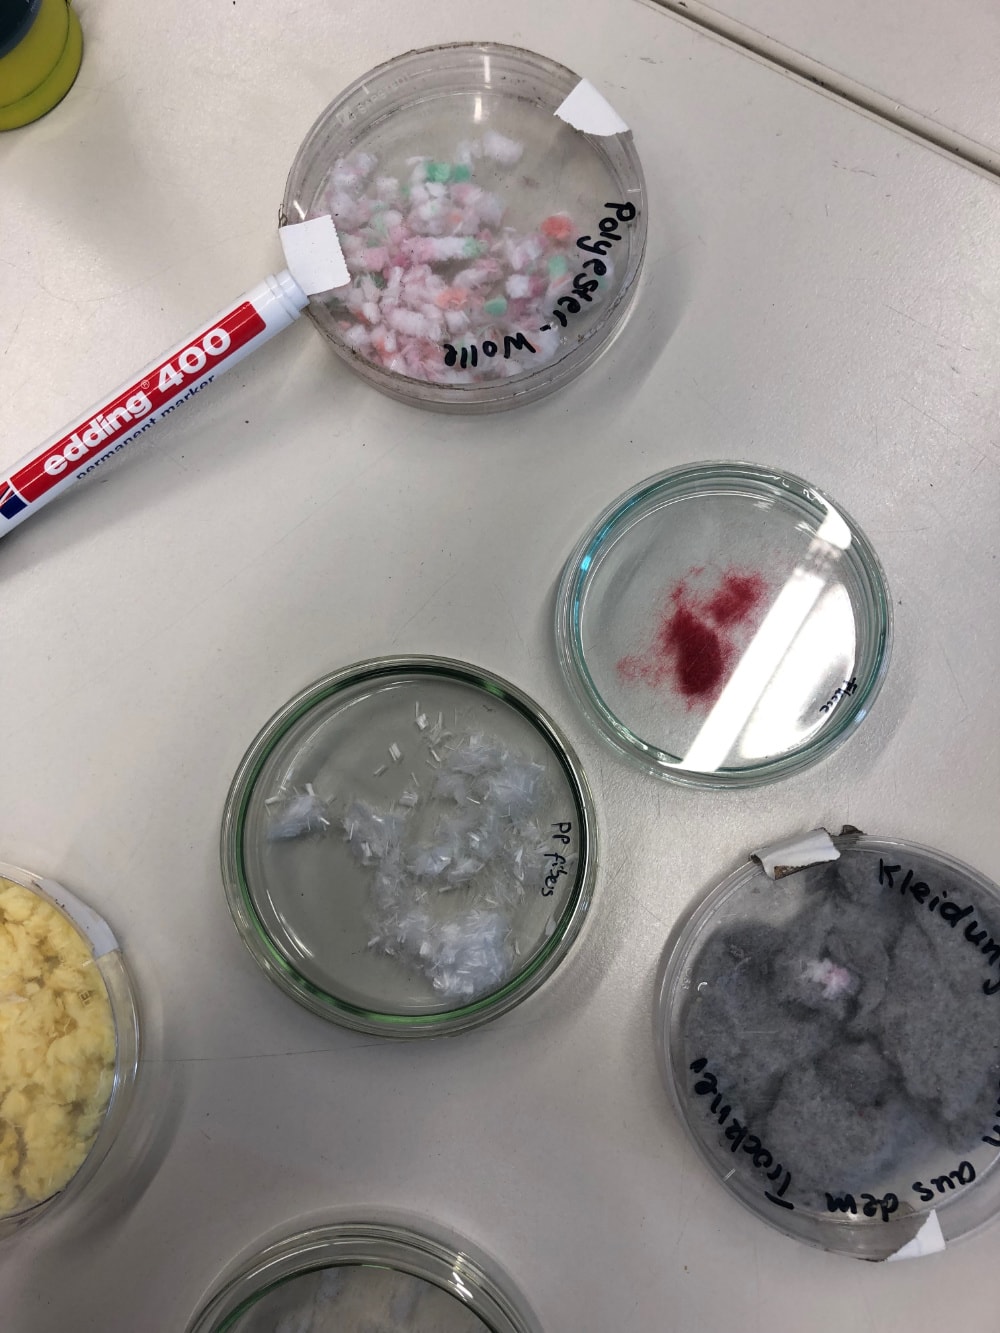 a magic marker and objects in Petri dishes